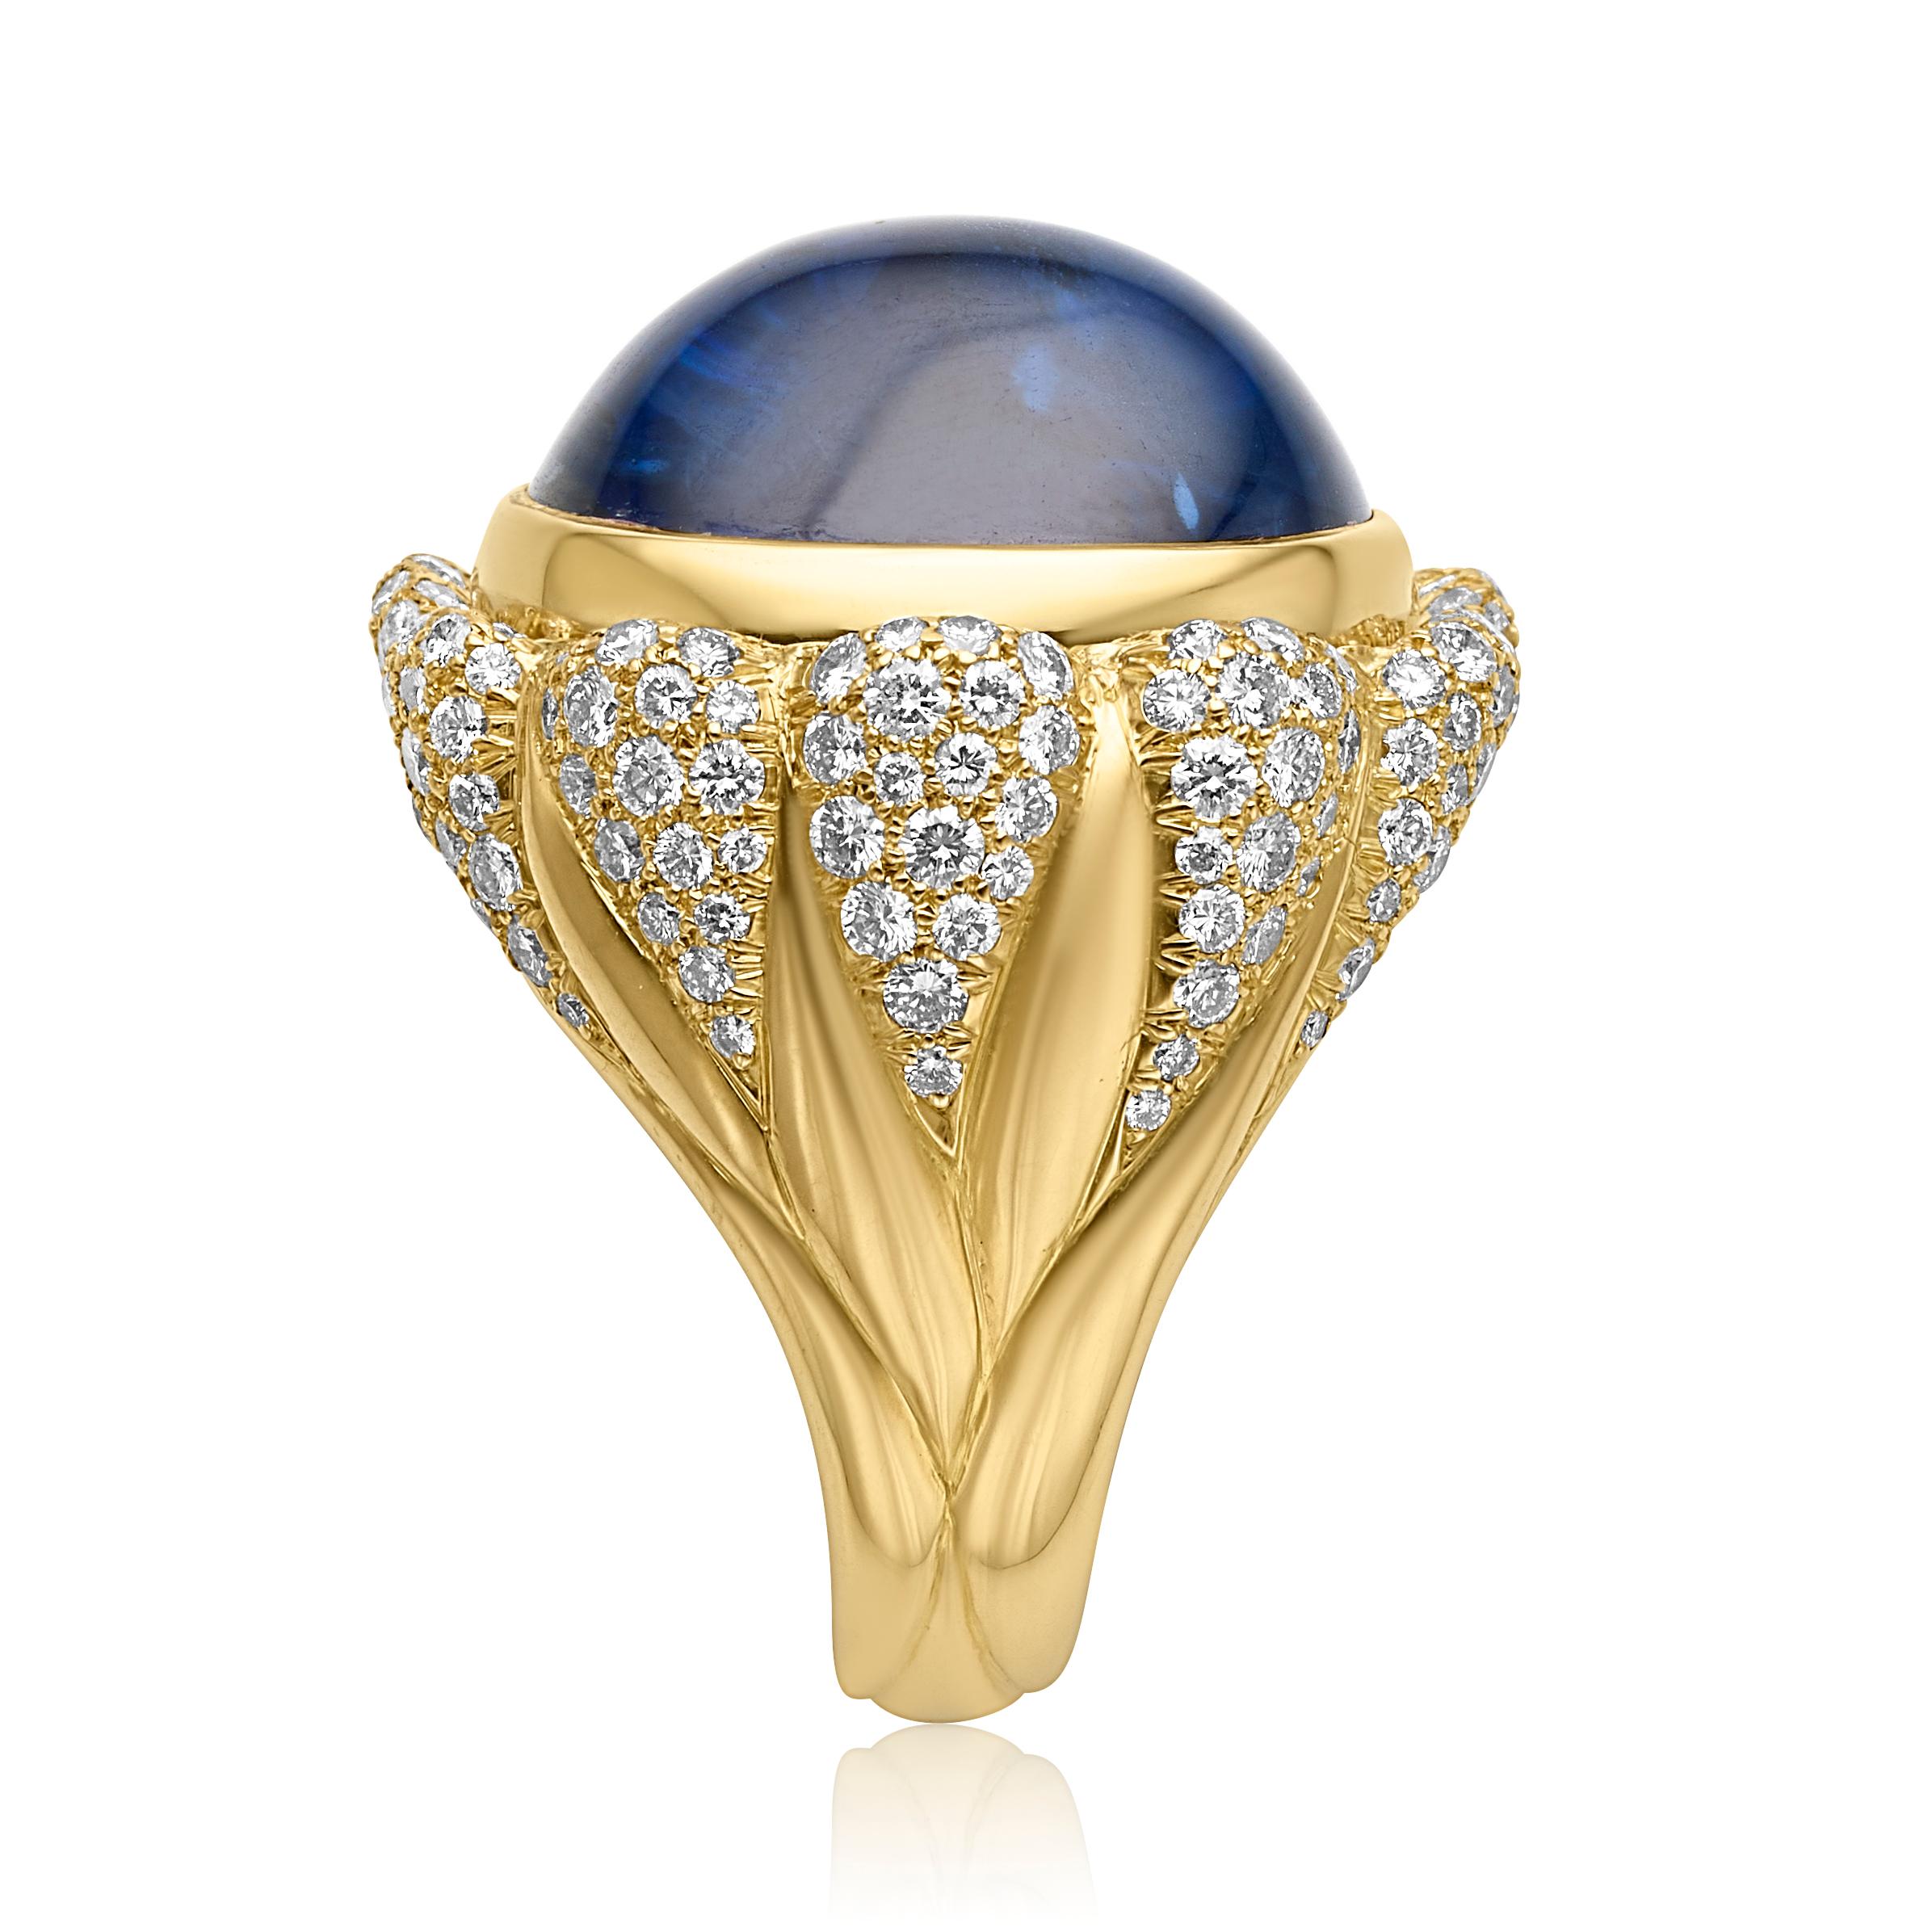 From designer Julius Cohen, circa 1980s, 18 karat yellow gold blue sapphire and diamond cocktail ring. This ring is crafted with a center 41.78 carat oval shape double cabochon cut no heat blue sapphire. Accenting the blue sapphire, 180 pave set